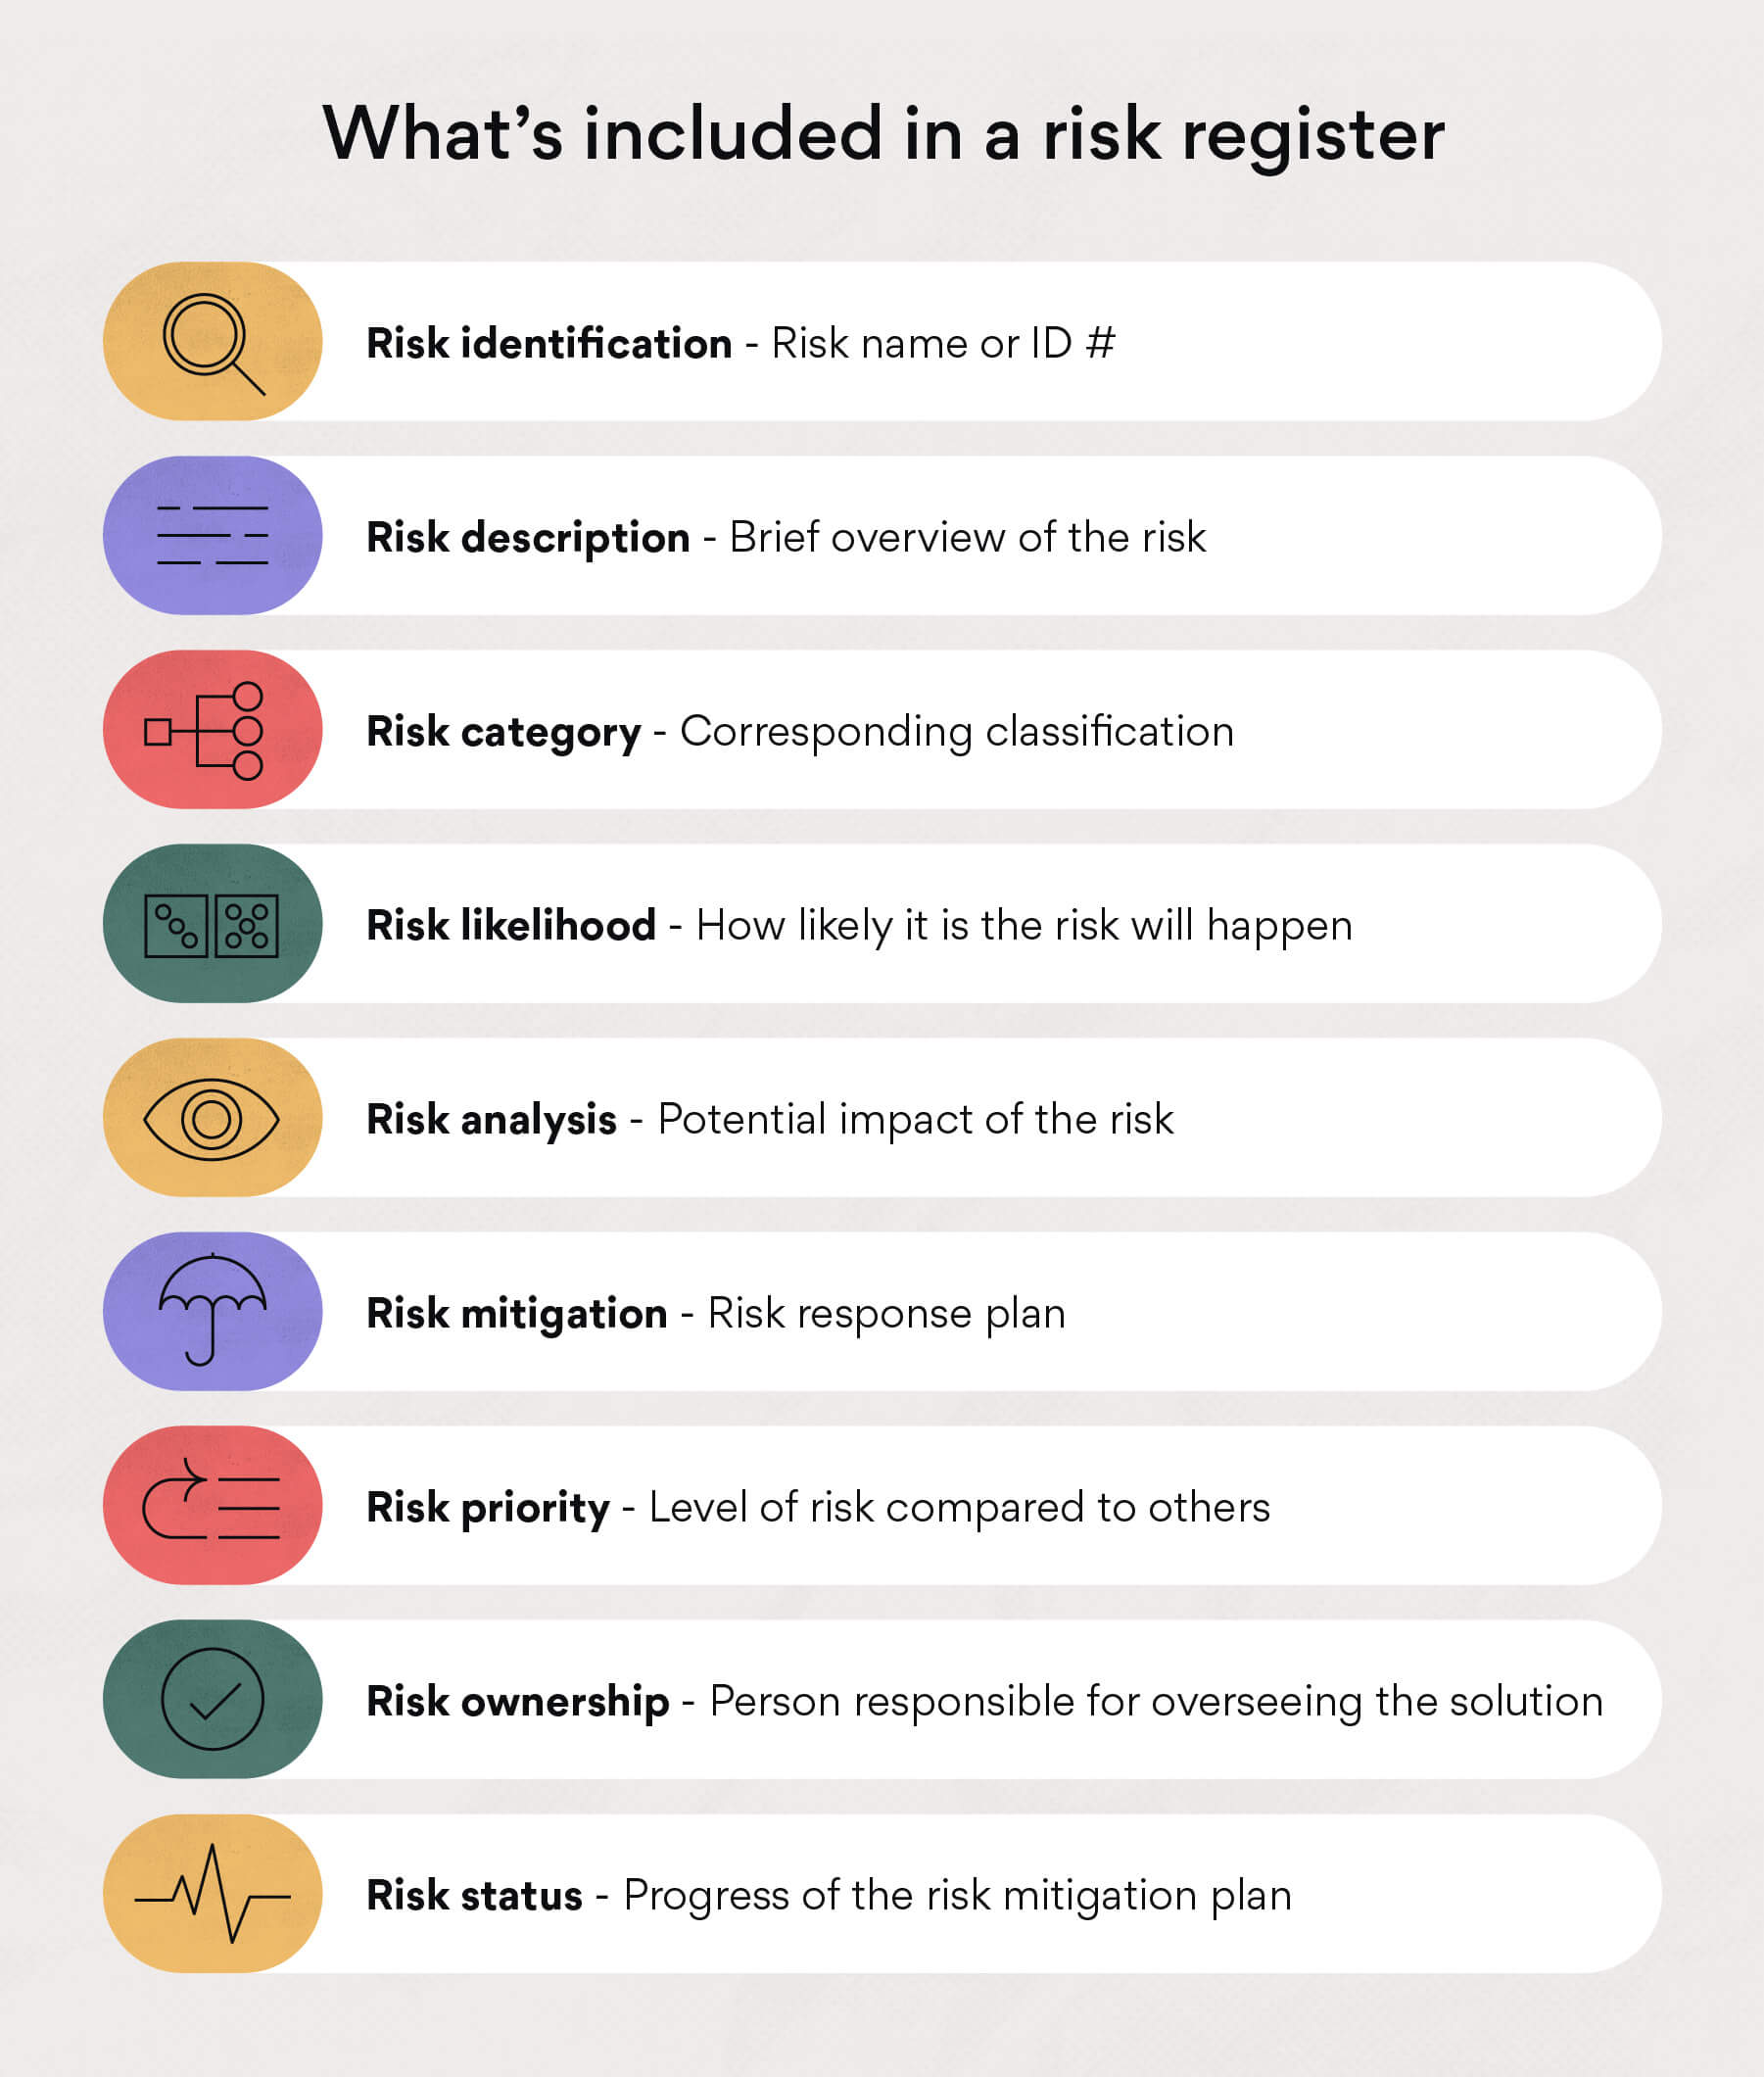 What's included in a risk register